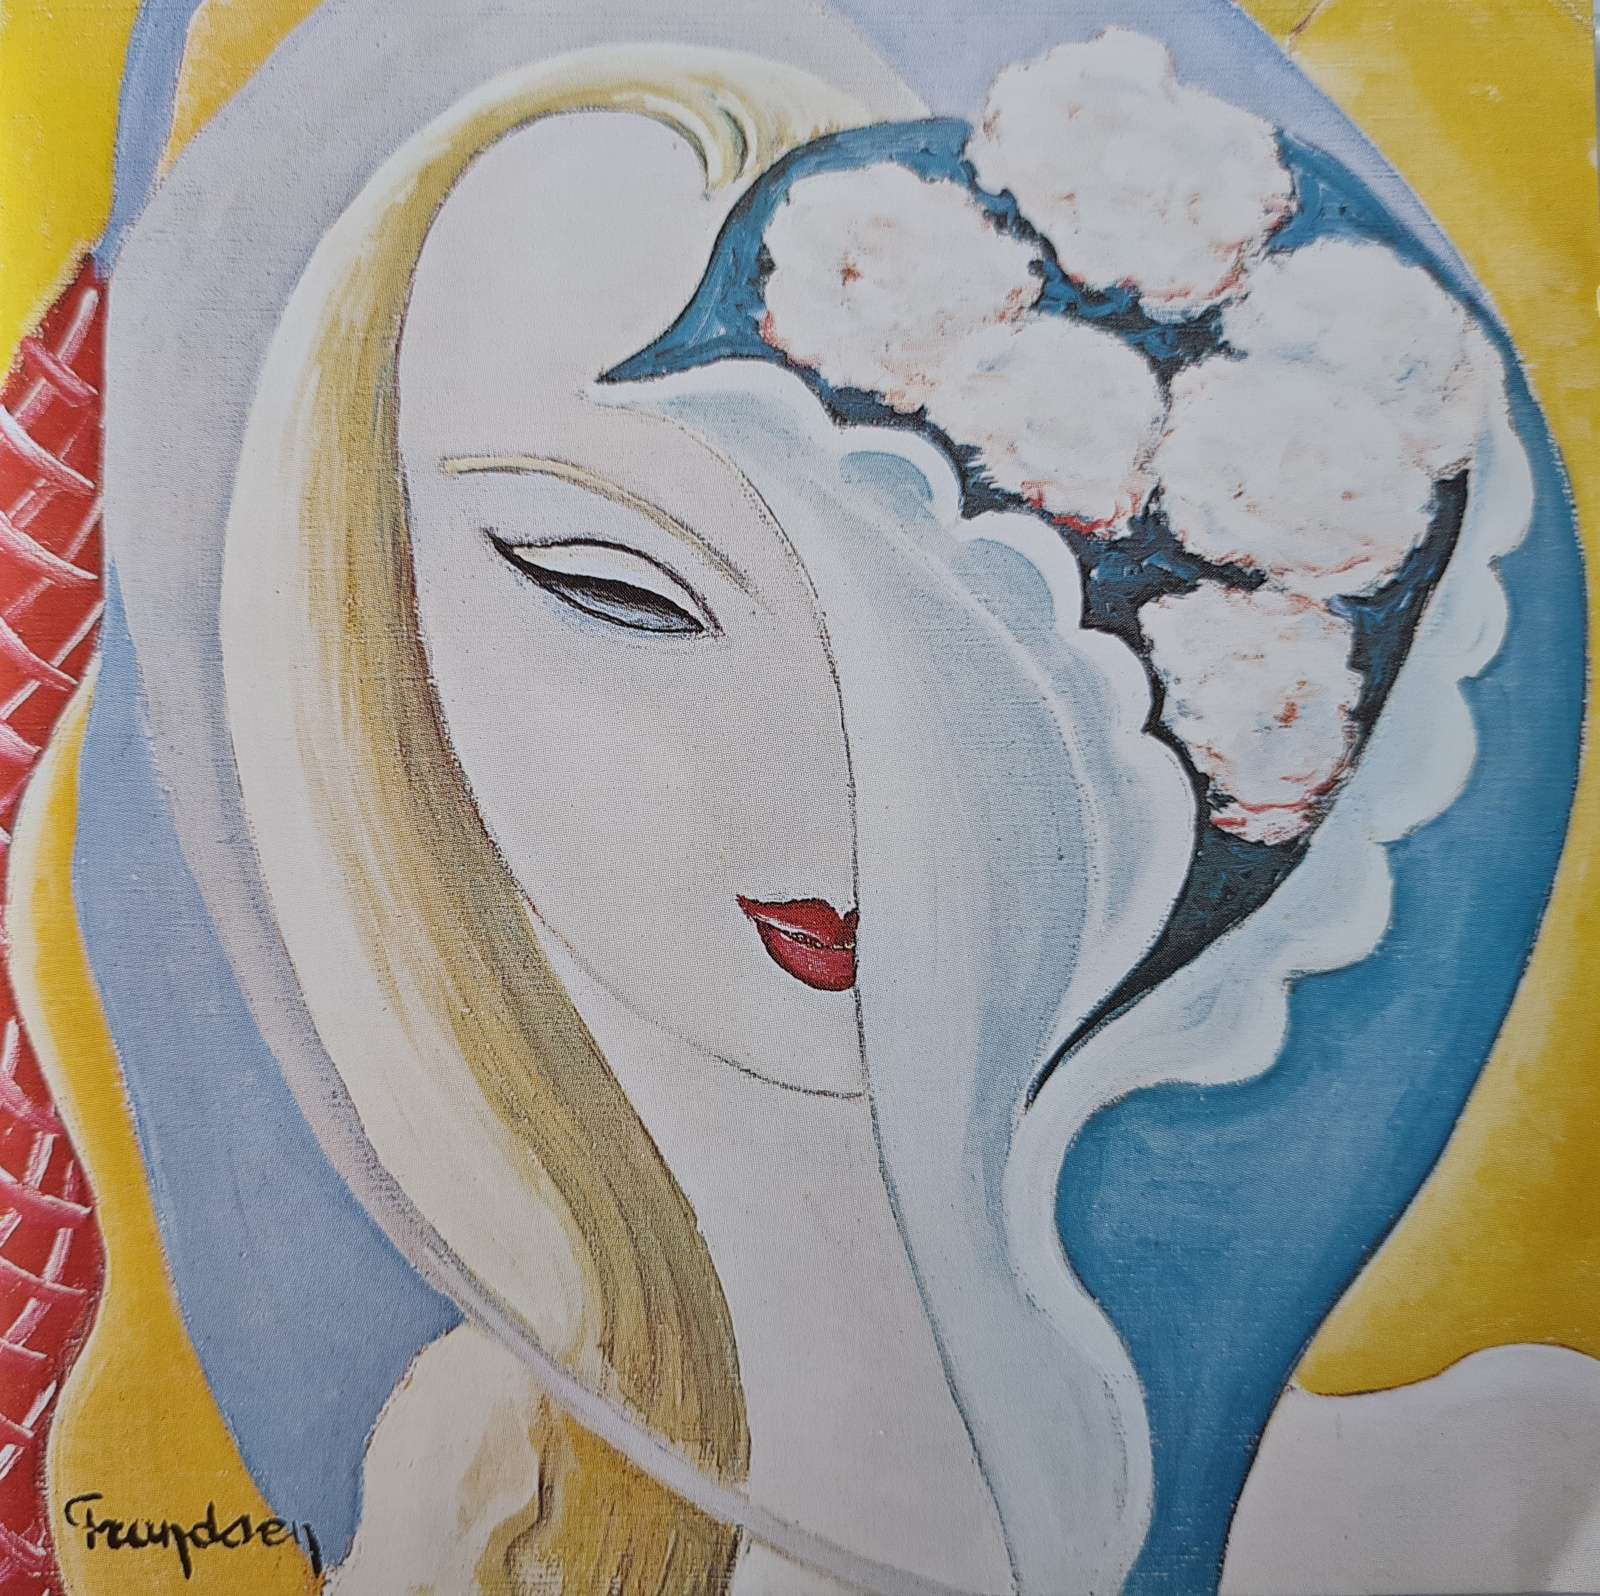 Derek and the Dominos - Layla (CD)